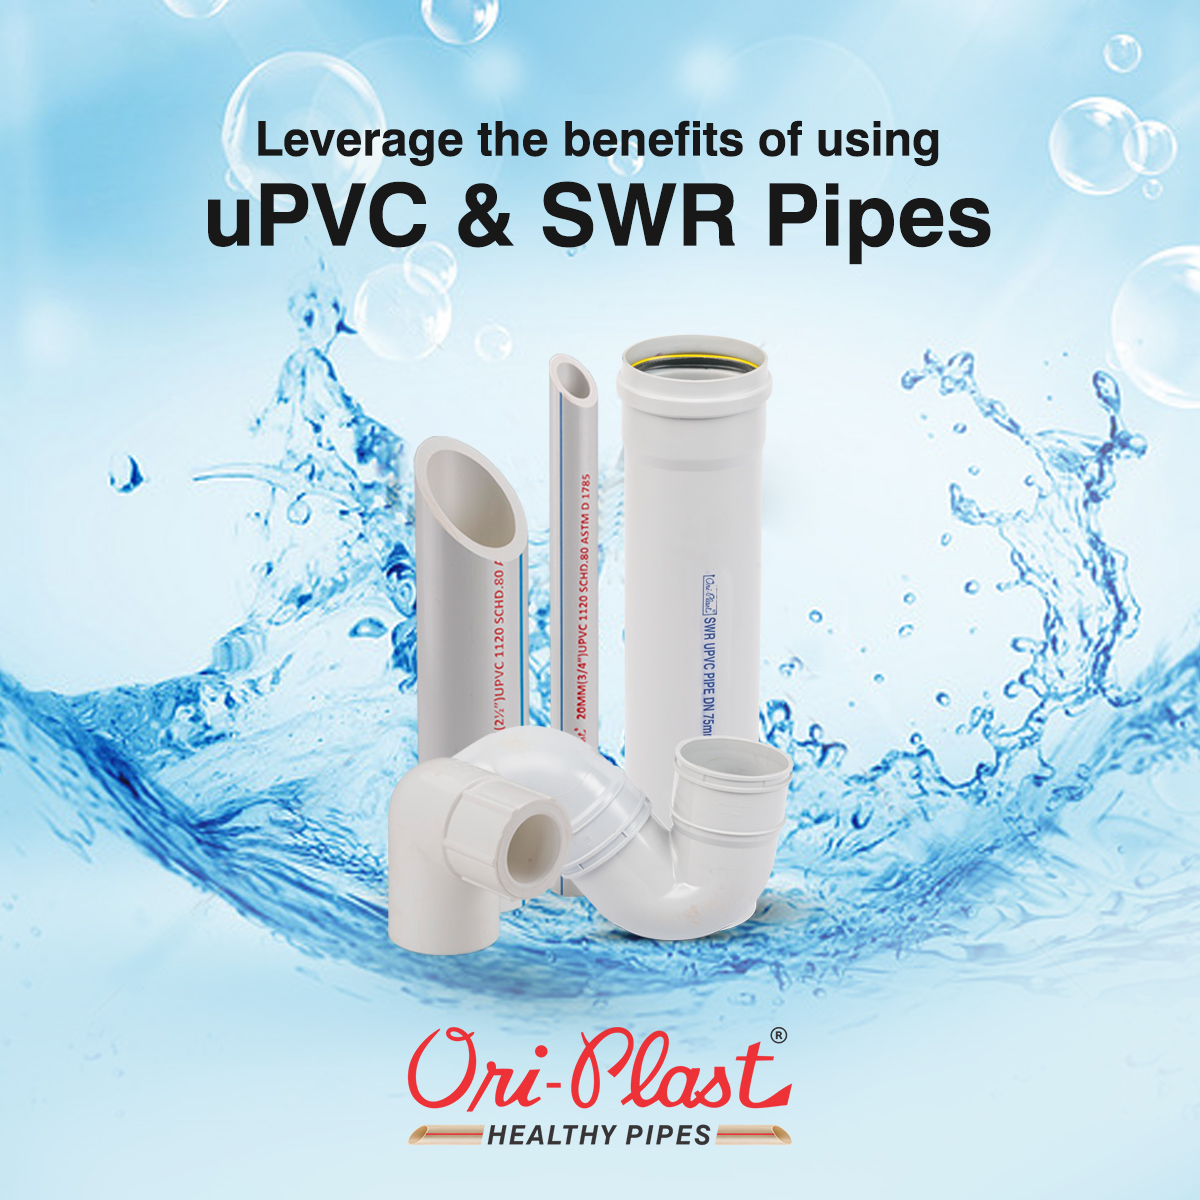 Leverage the benefits of using uPVC SWR Pipes